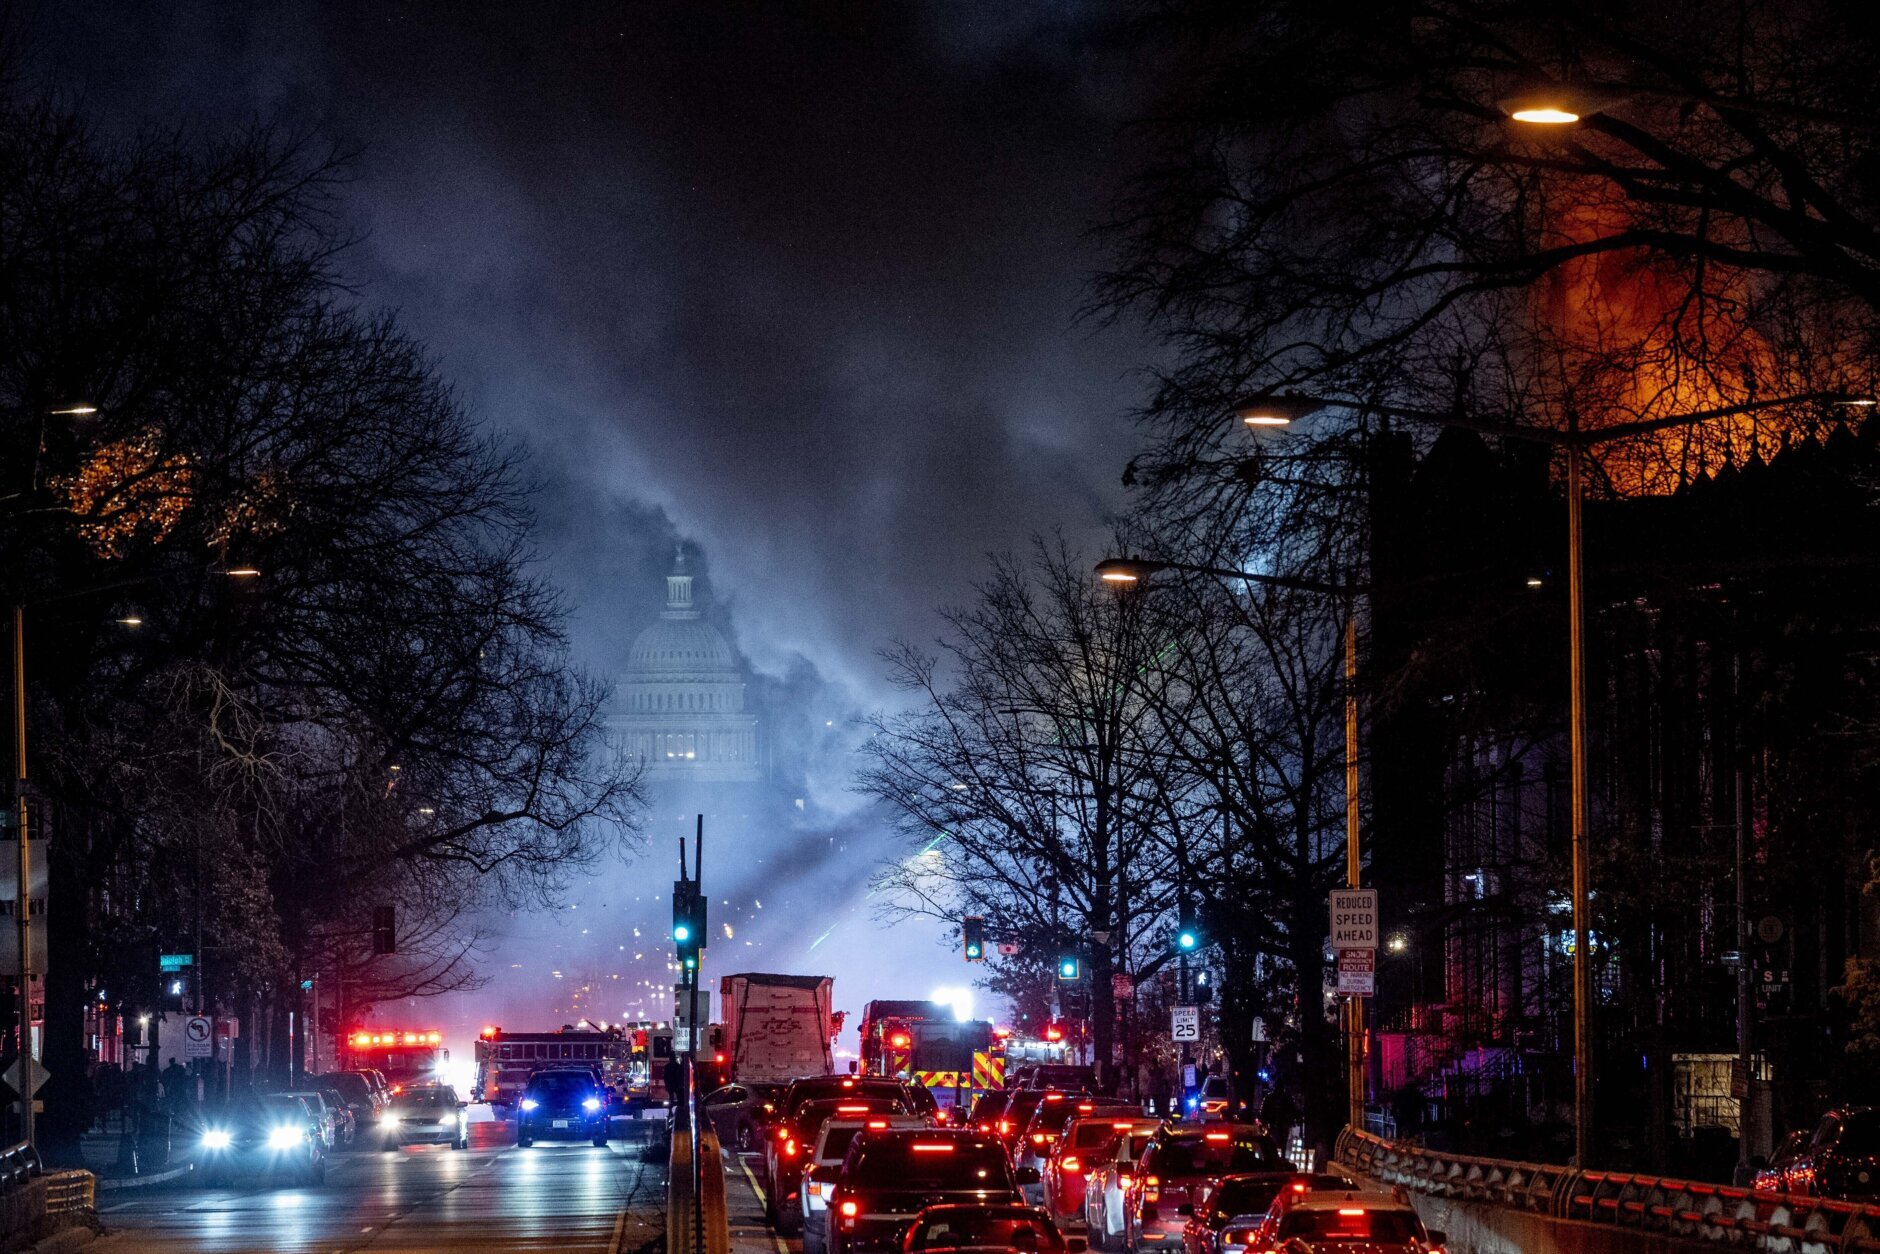 The Dome of the U.S. Capitol Building is visible through smoke, as flames shoot from a two alarm fire, at right, that started in a former fire station, Old Engine Company No. 12, now a landmark along North Capitol Street, in the Bloomingdale neighborhood of Washington, Friday, Dec. 15, 2023. (AP Photo/Andrew Harnik)